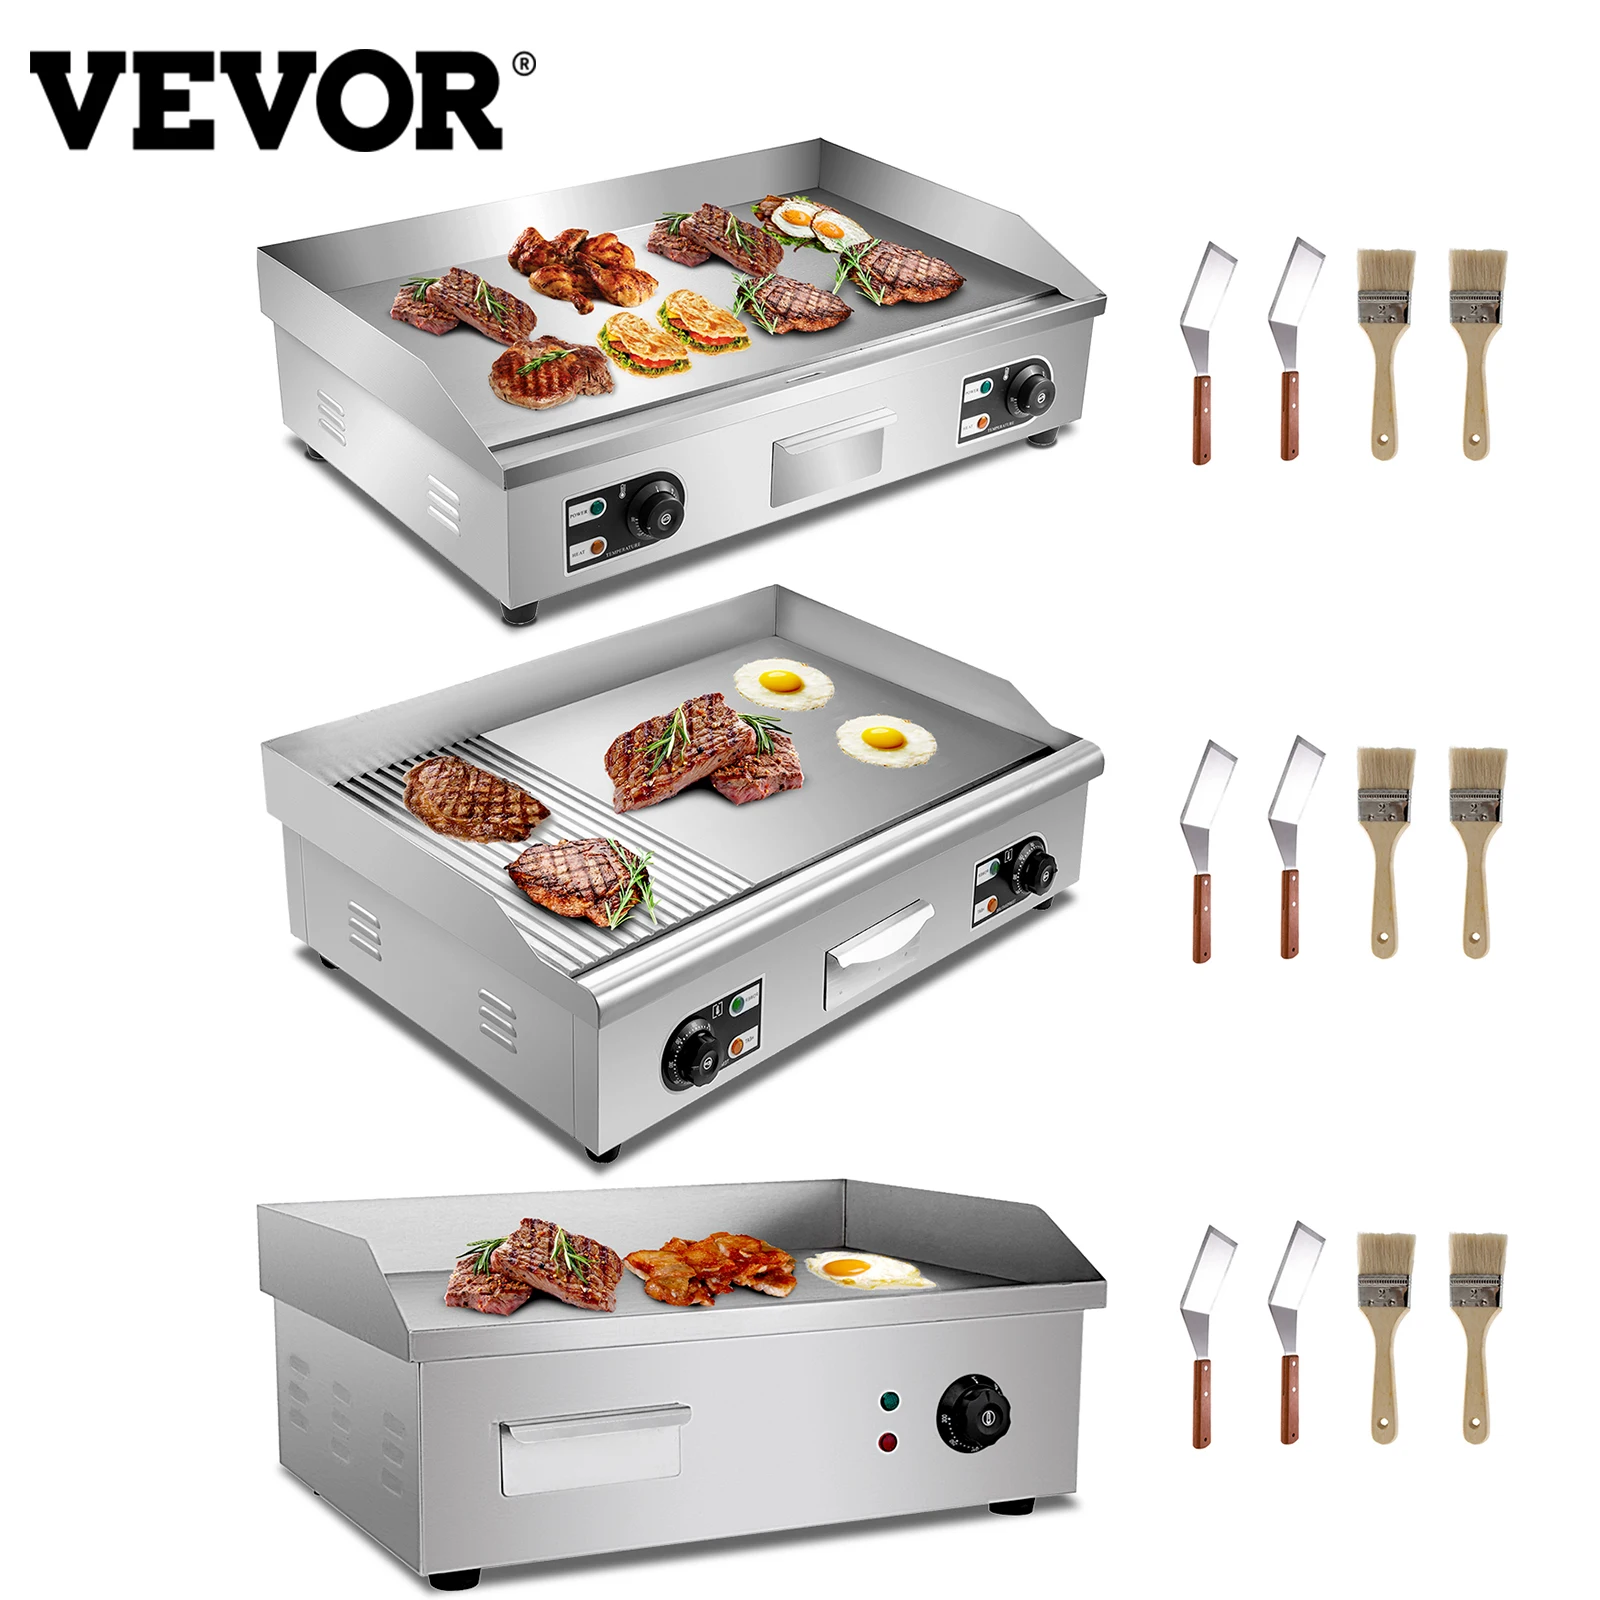 VEVOR Electric Countertop Griddle with Drawer & Cooling Holes Stainless Steel Flat Top Grill for BBQ Cooking Steak, Pancakes etc